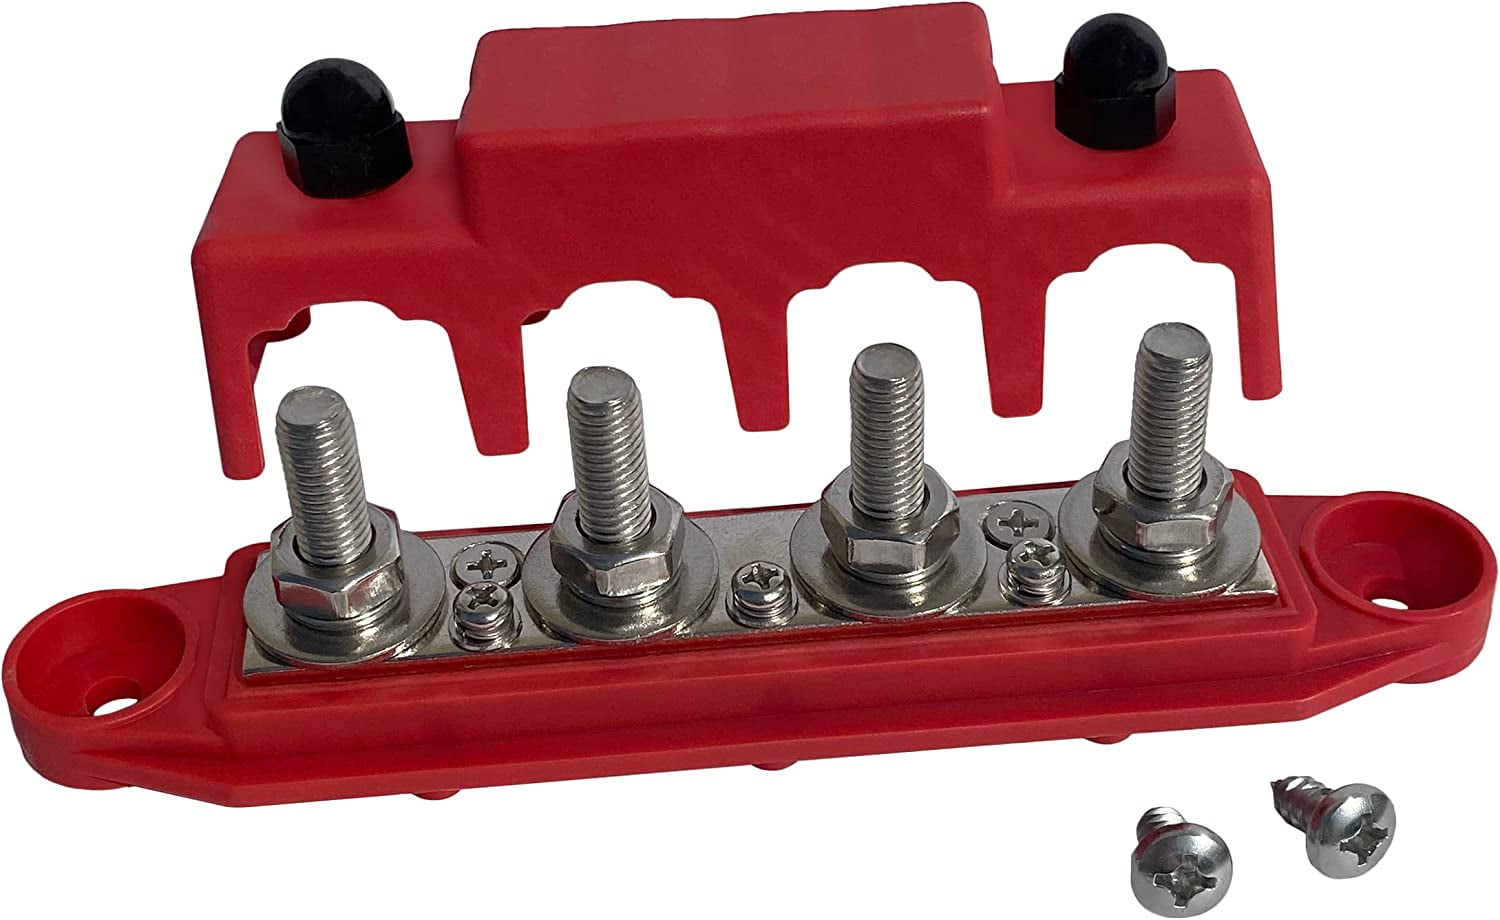 Red 4 Post Busbar Bus Bar Power Distribution Block with Cover M8 Terminal  Studs